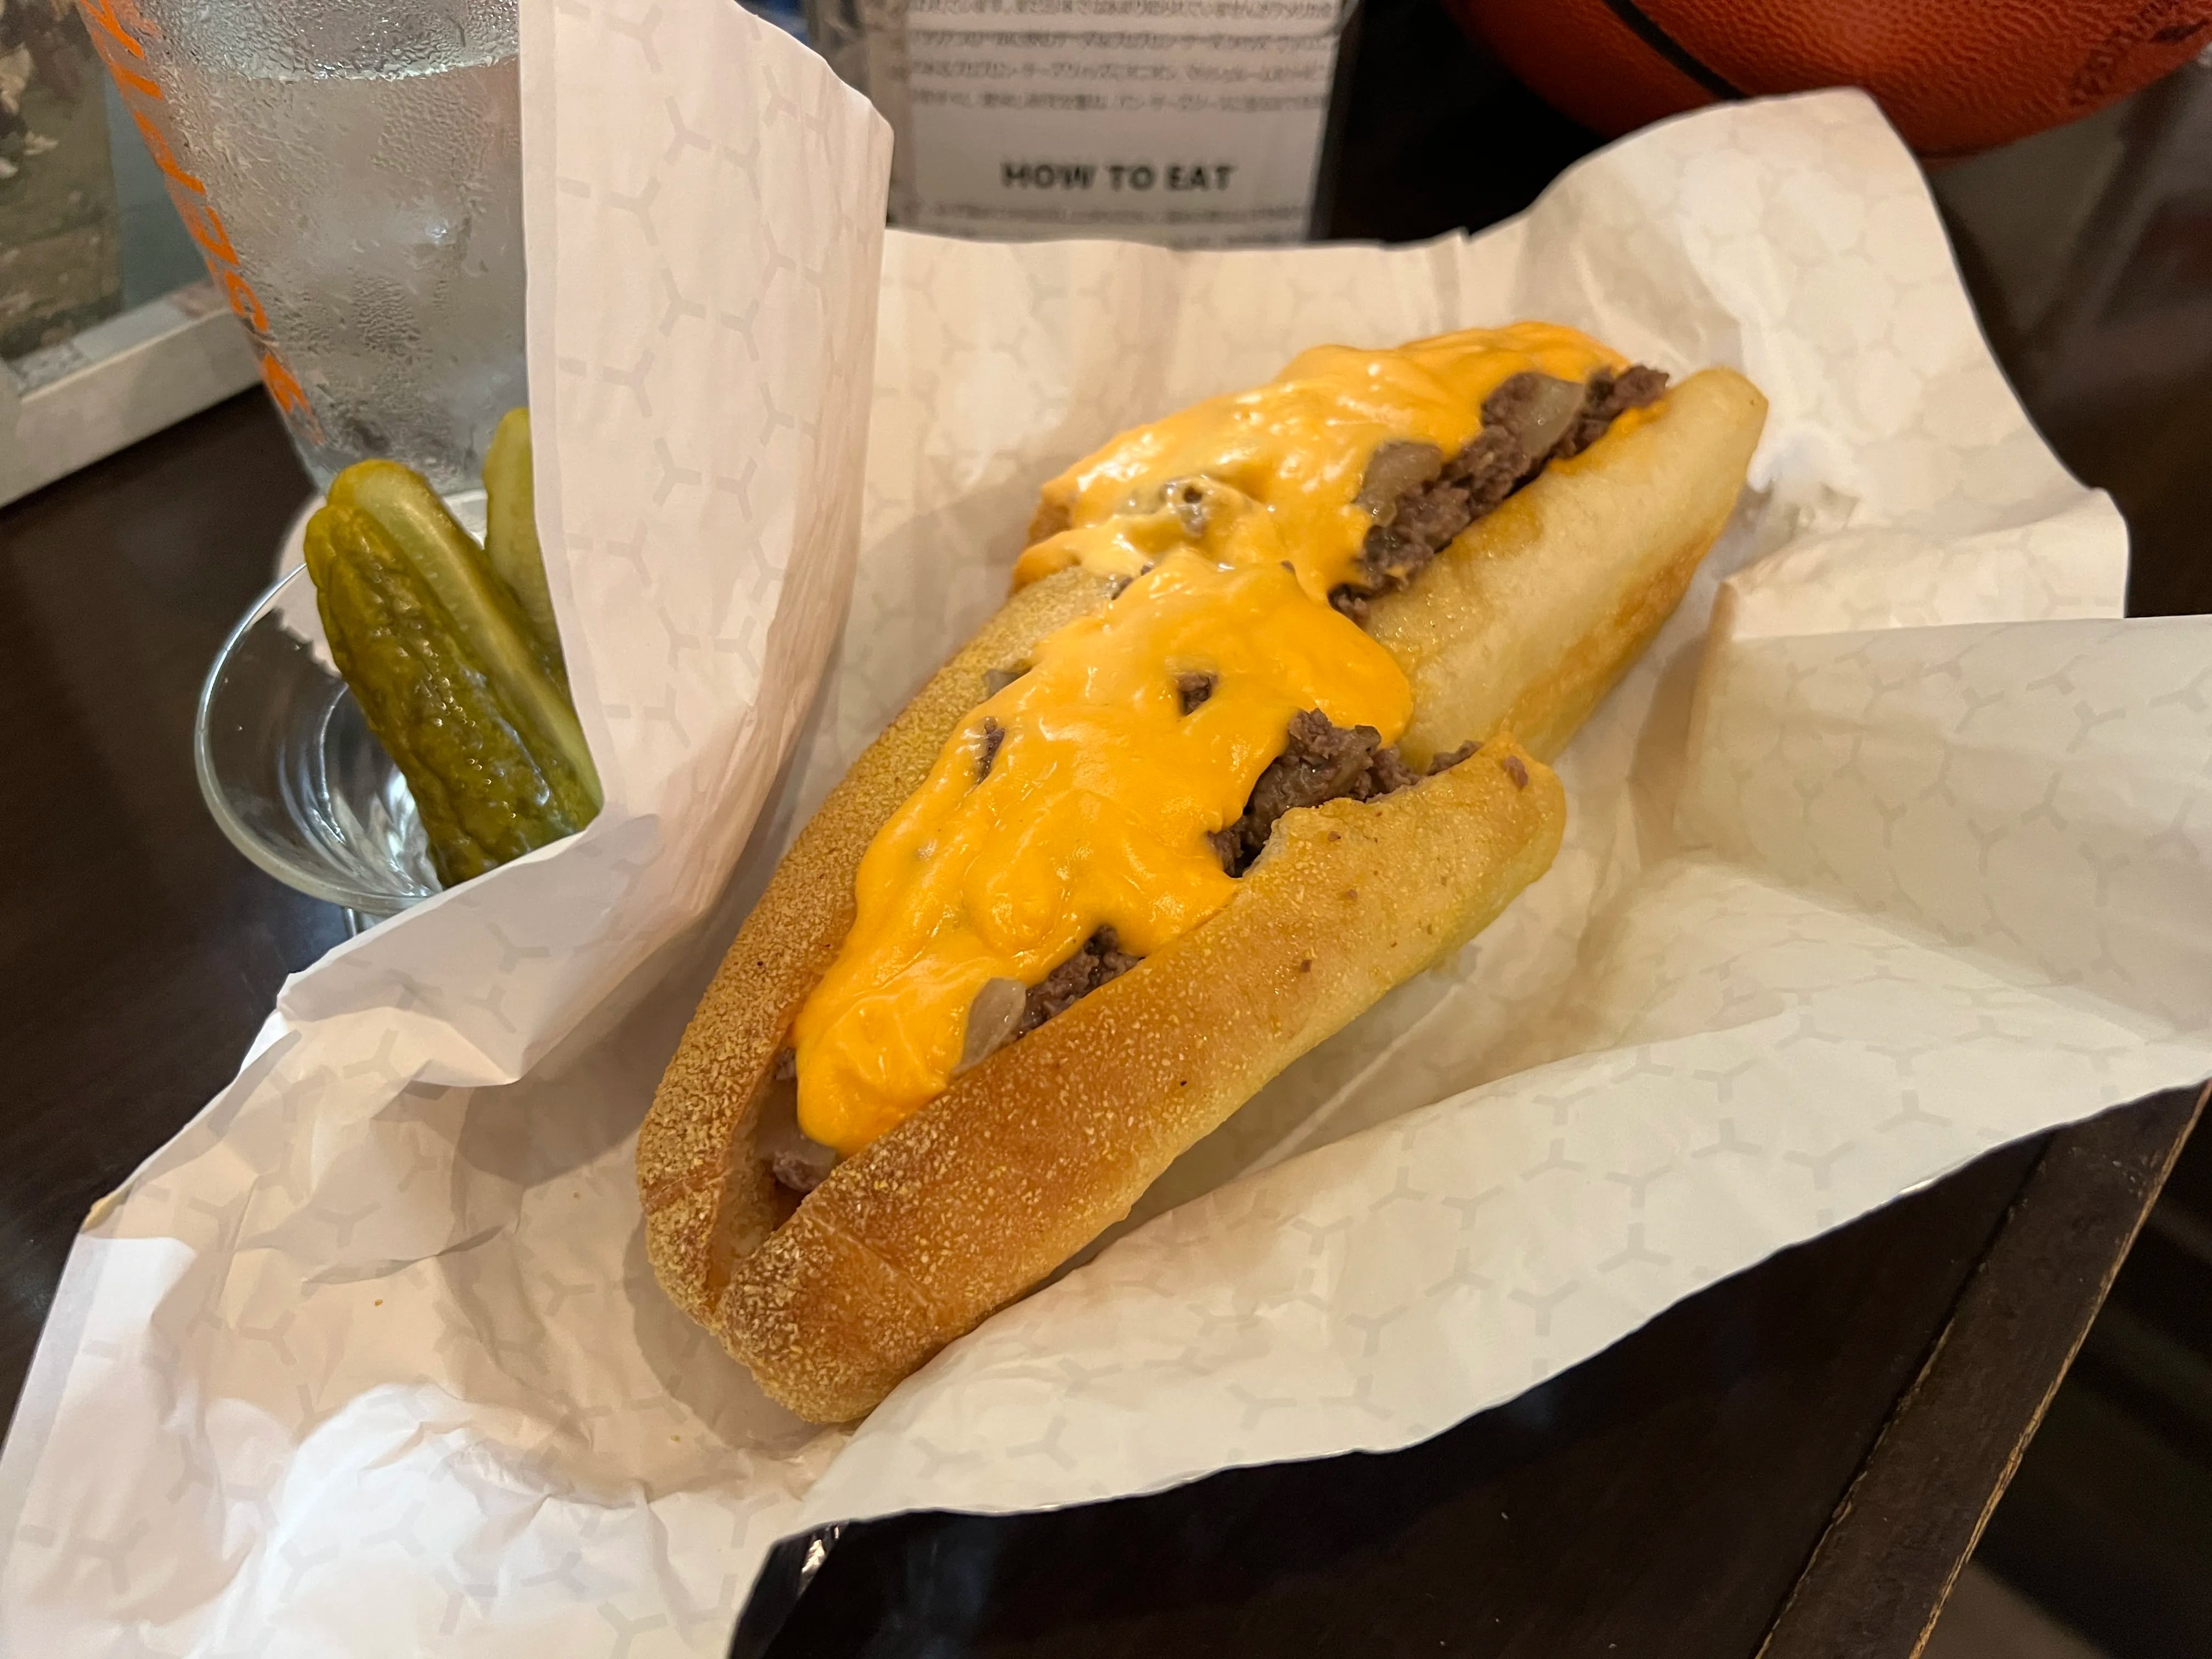 A Philly cheesesteak with cheese whiz at Nihonbashi Philly restaurant in Tokyo, Japan.